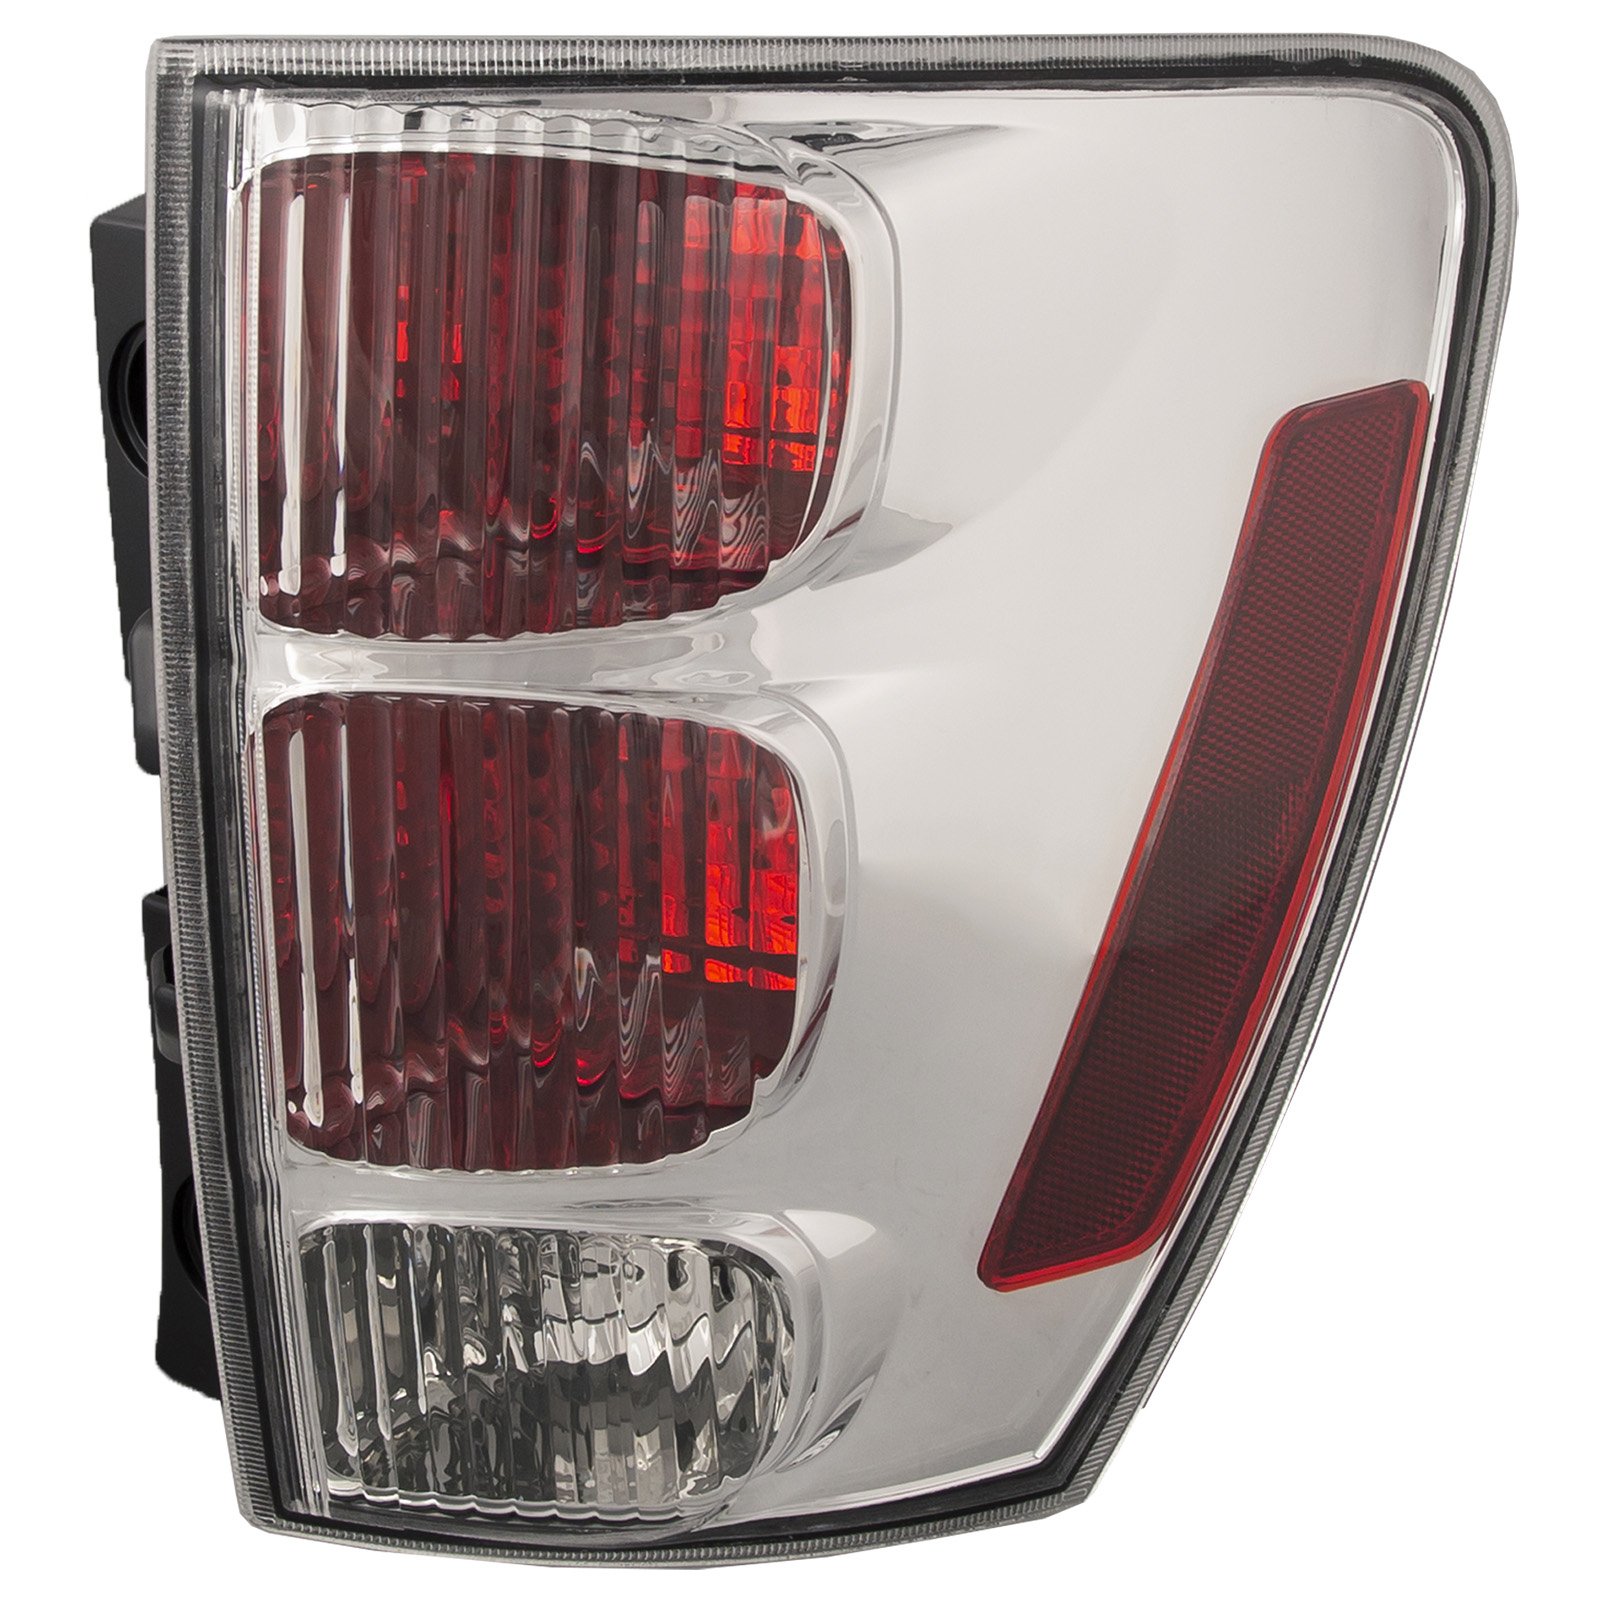 Blk 2005-2009 Chevy Equinox Tail Lights Brake Lamps Replacement 05-09 Left+Right